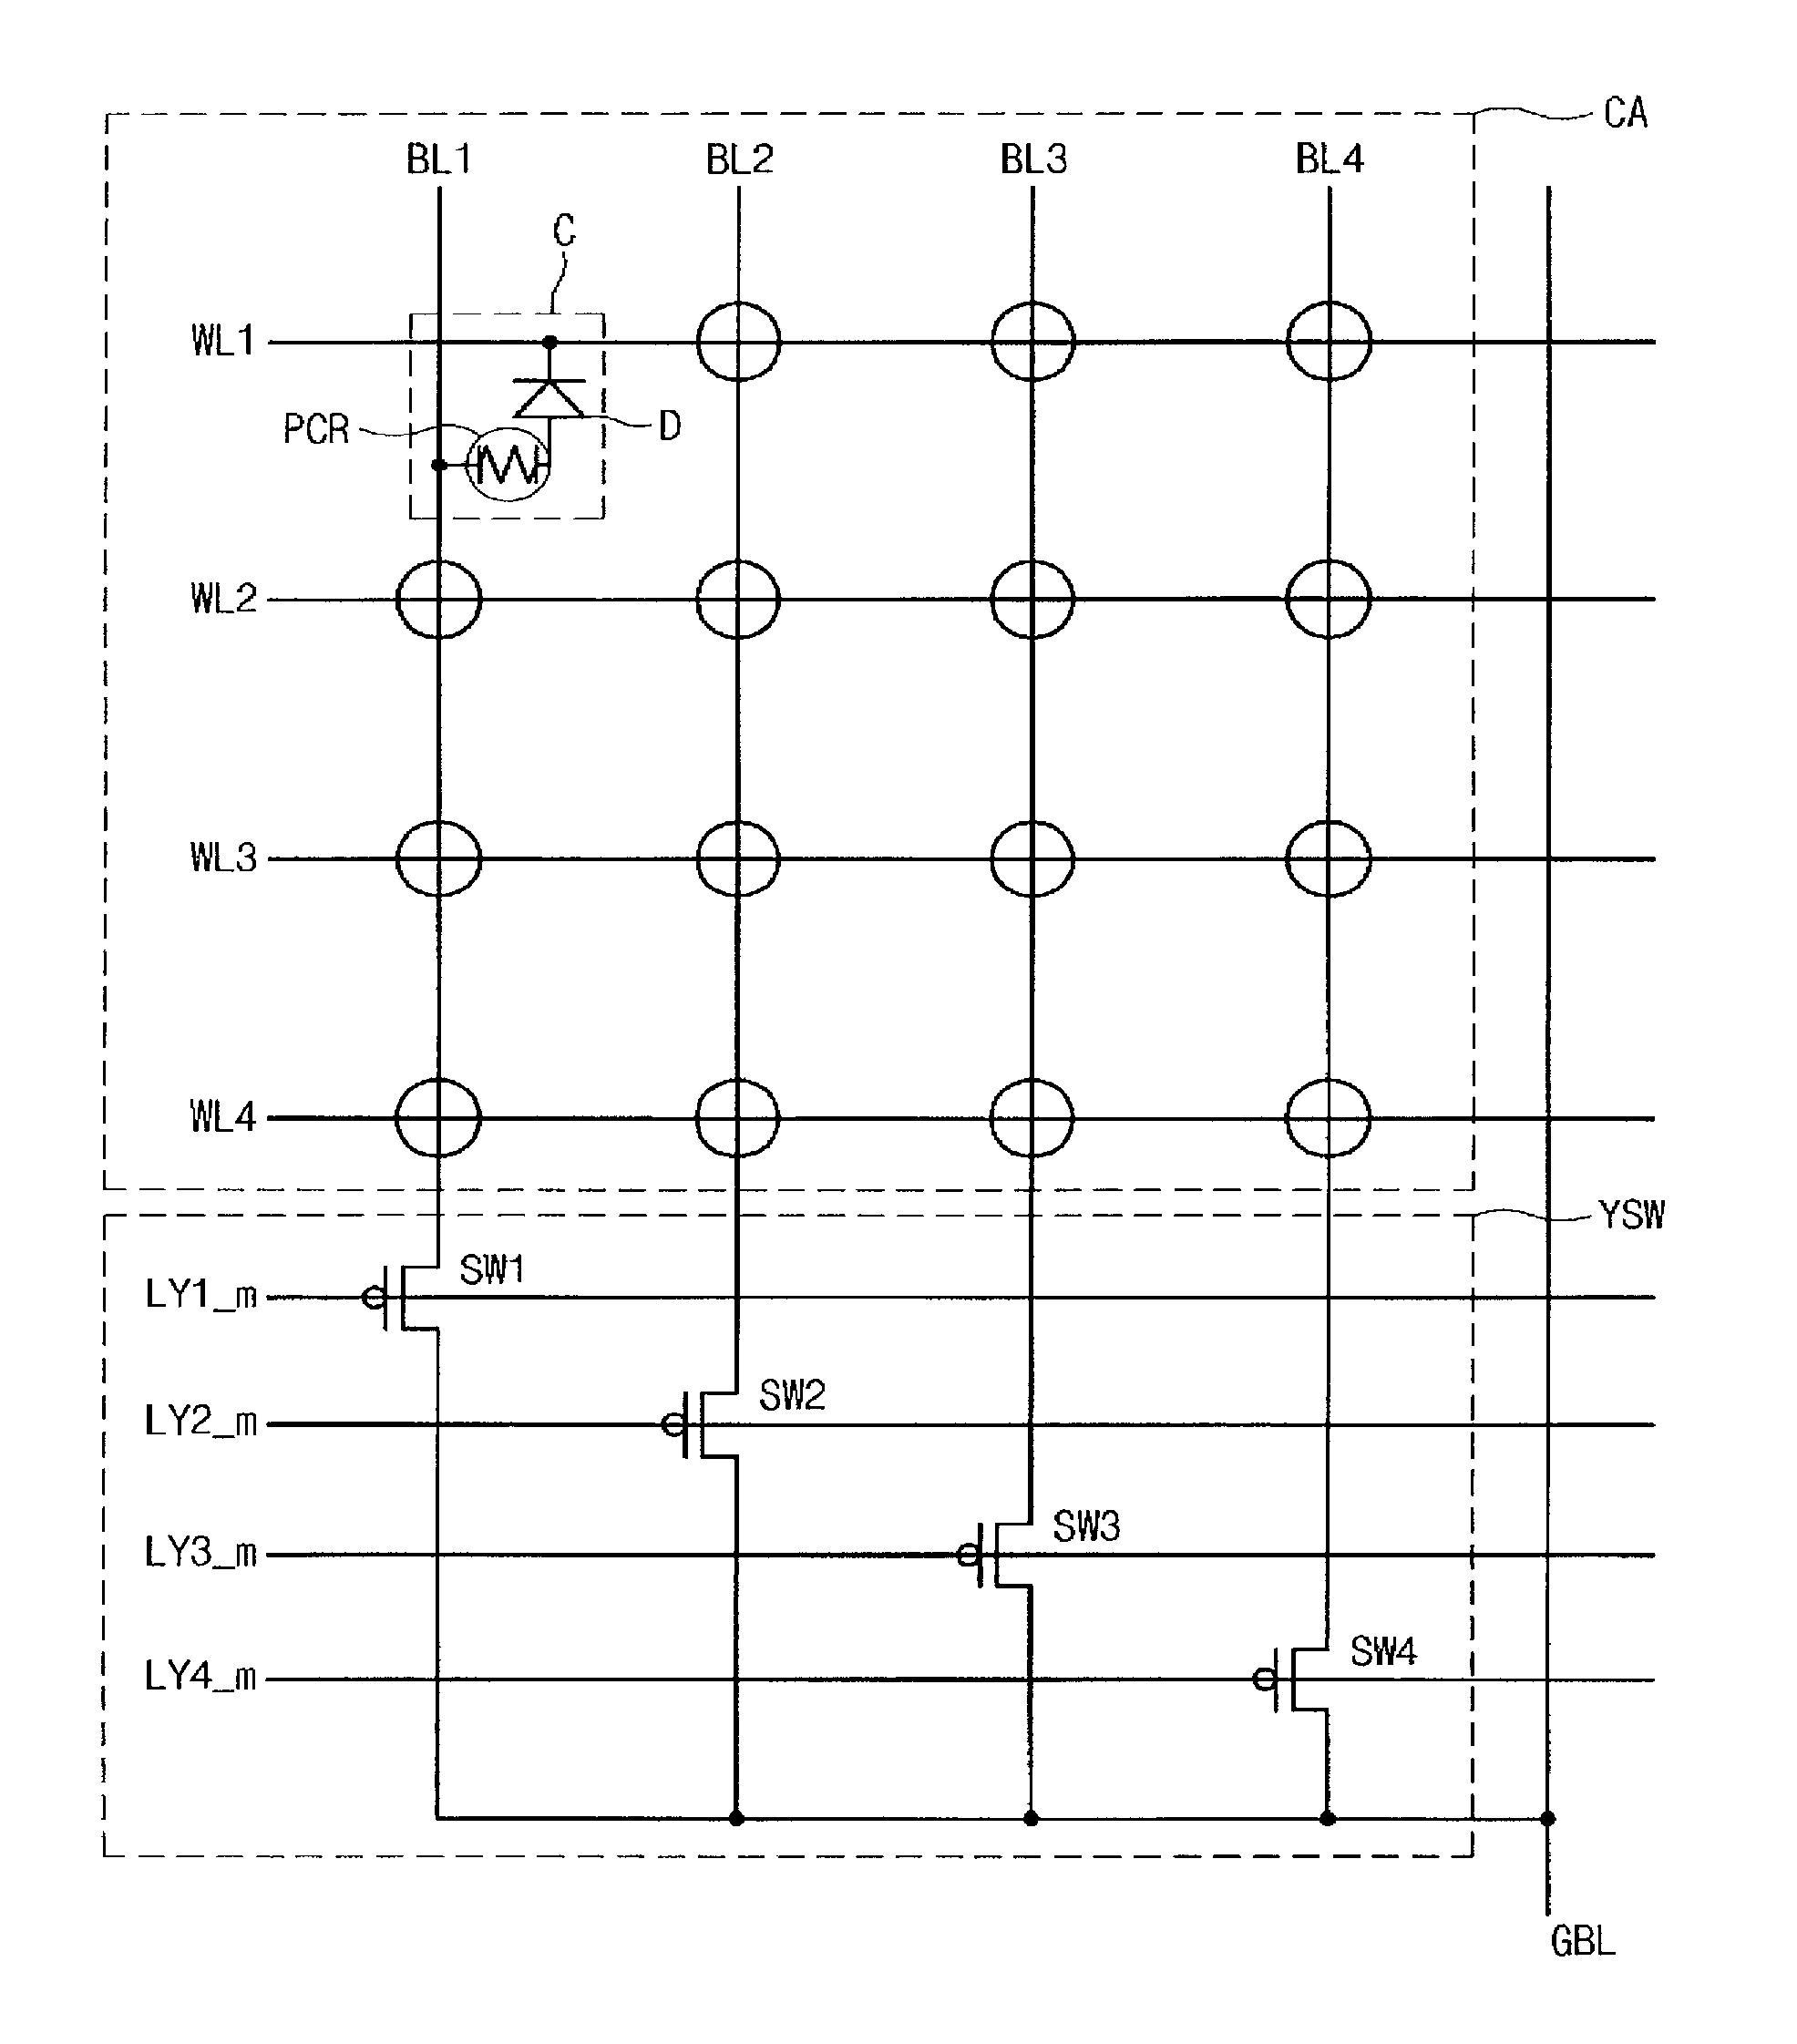 Phase change memory device with improved performance that minimizes cell degradation